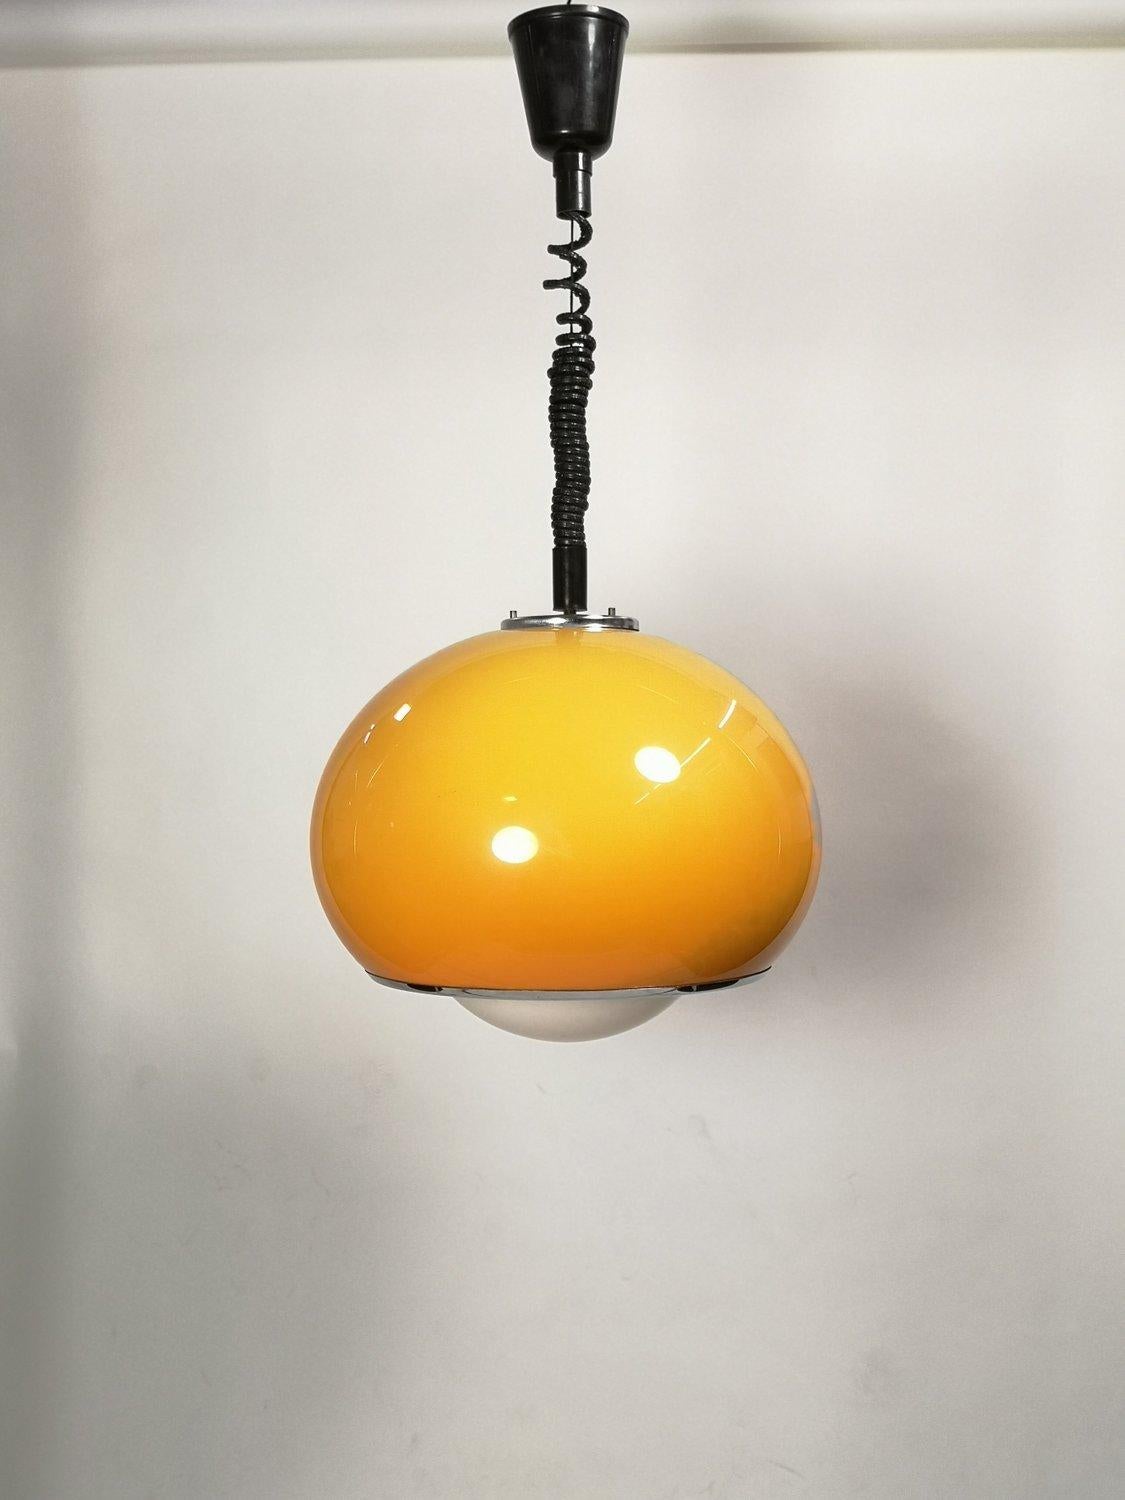 Mid-Century Modern Meblo drop light by Harvey Guzzini. The orange variation (this color) is said to be the best looking verion of this model. Overall good condition, although there is some minor wear consistent with age and use.